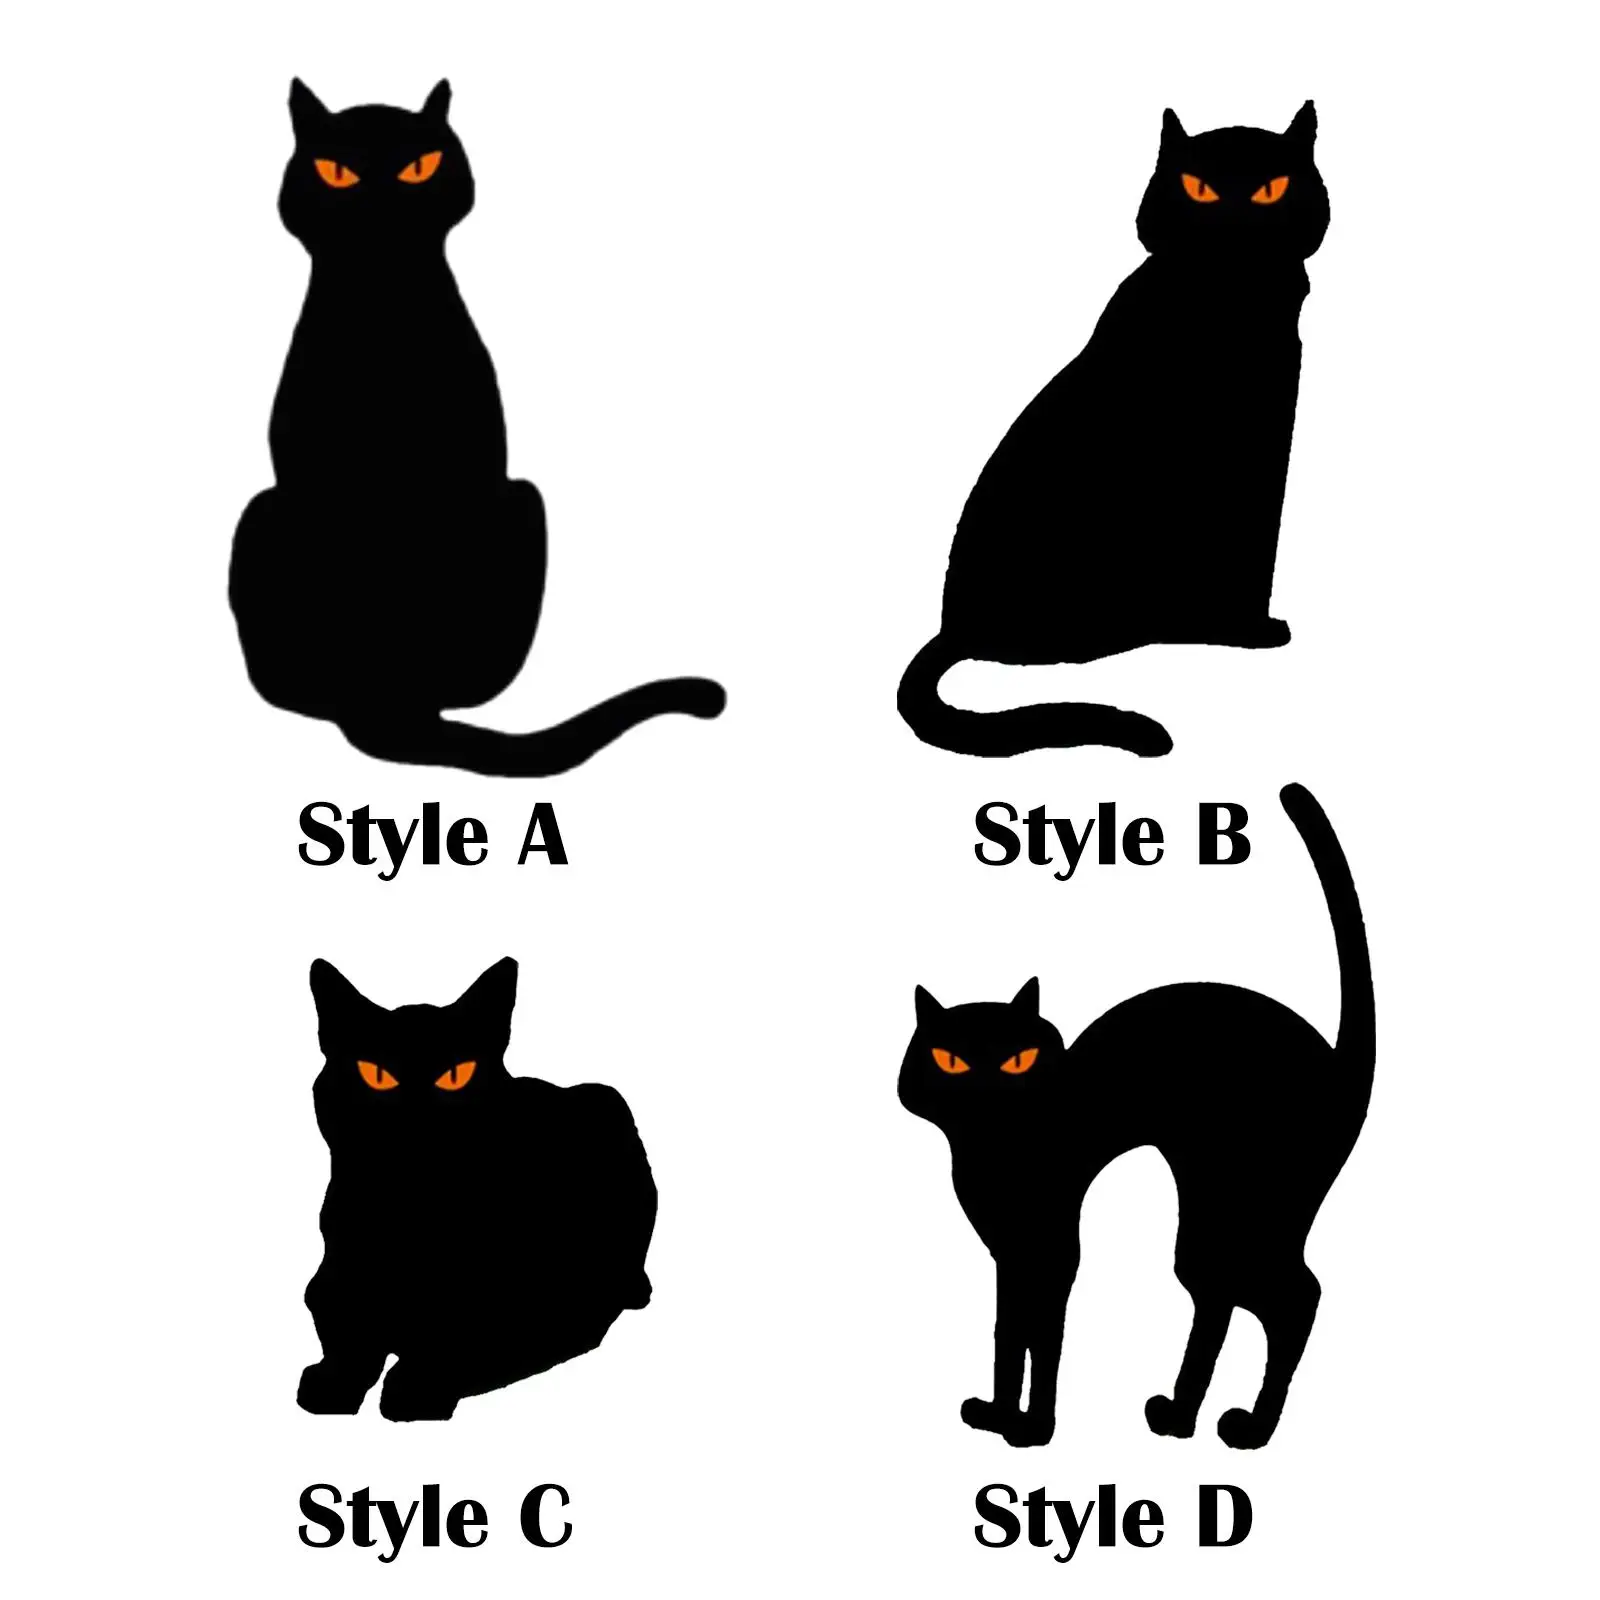 Black Cat Silhouette Garden Stakes Halloween Decorative Party Props Gifts Metal Animal Scary Statues Ornament for Yard Art Lawn